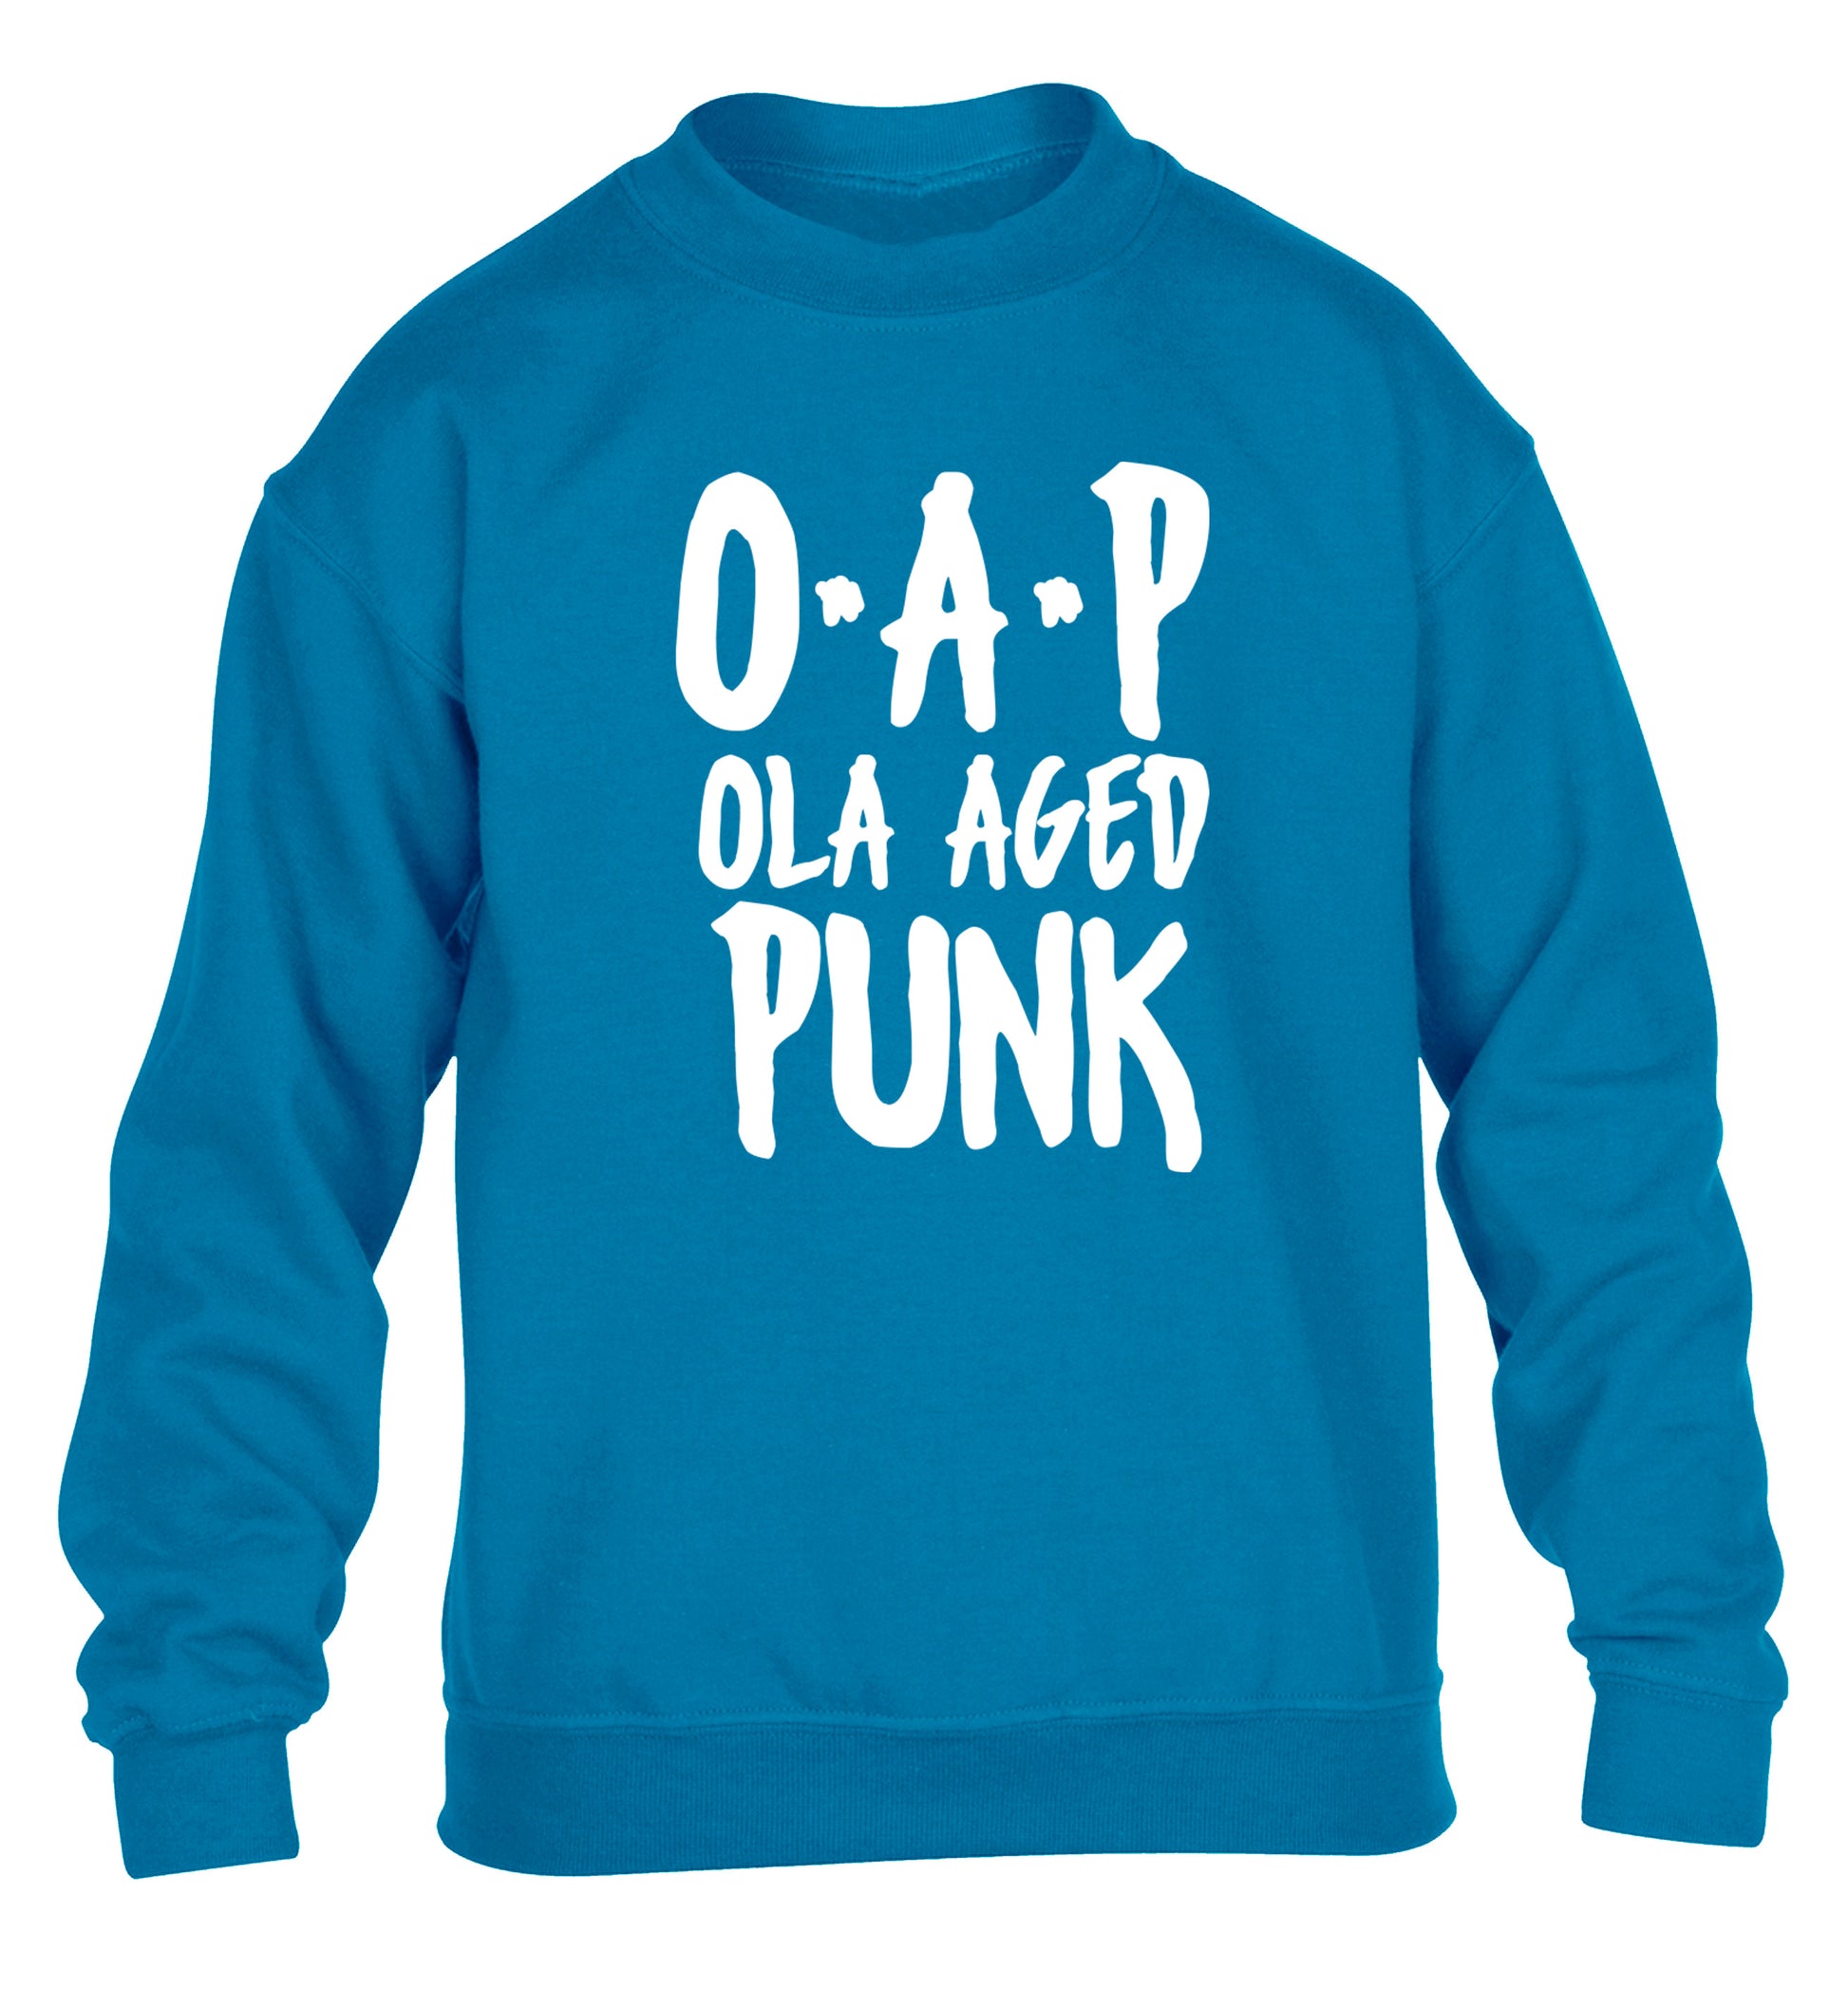 O.A.P Old Aged Punk children's blue sweater 12-13 Years